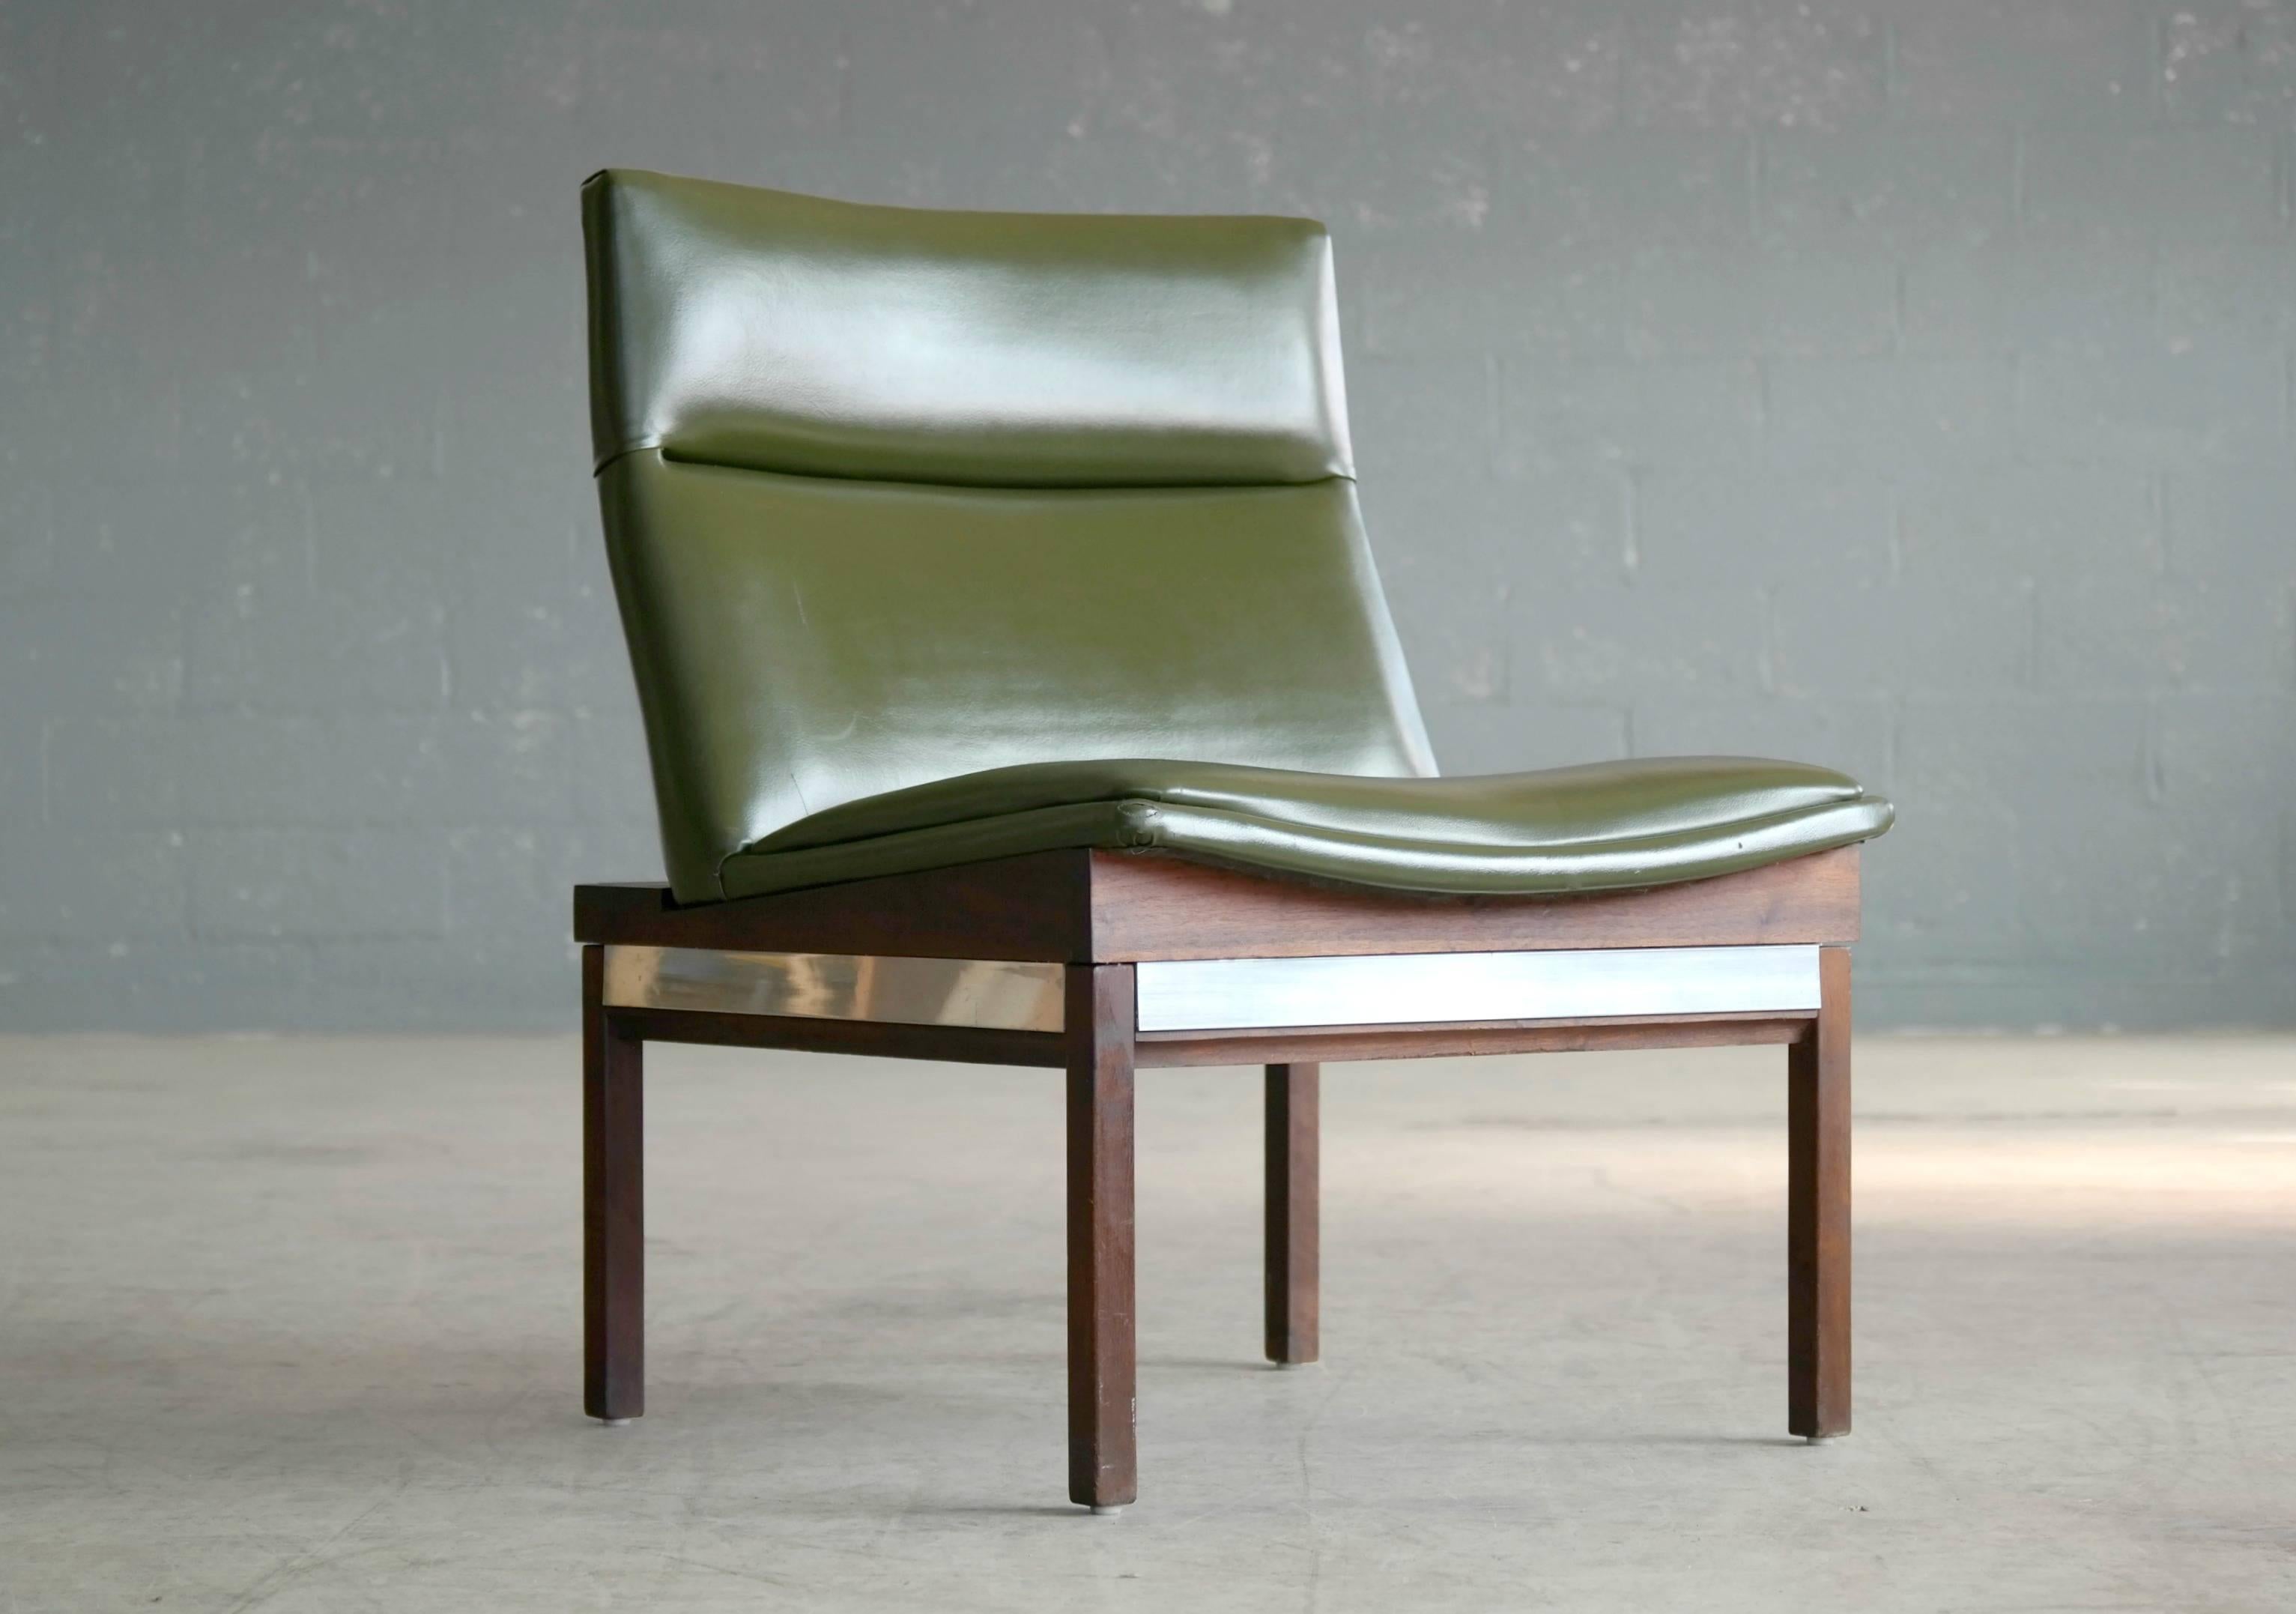 Very cool lounge chair in walnut with aluminum accents and covered in green Naugahyde designed by Arthur Umanoff in the 1950s for Madison Furniture Industries. Overall very good condition with just with minor natural age wear. 

The chair was part